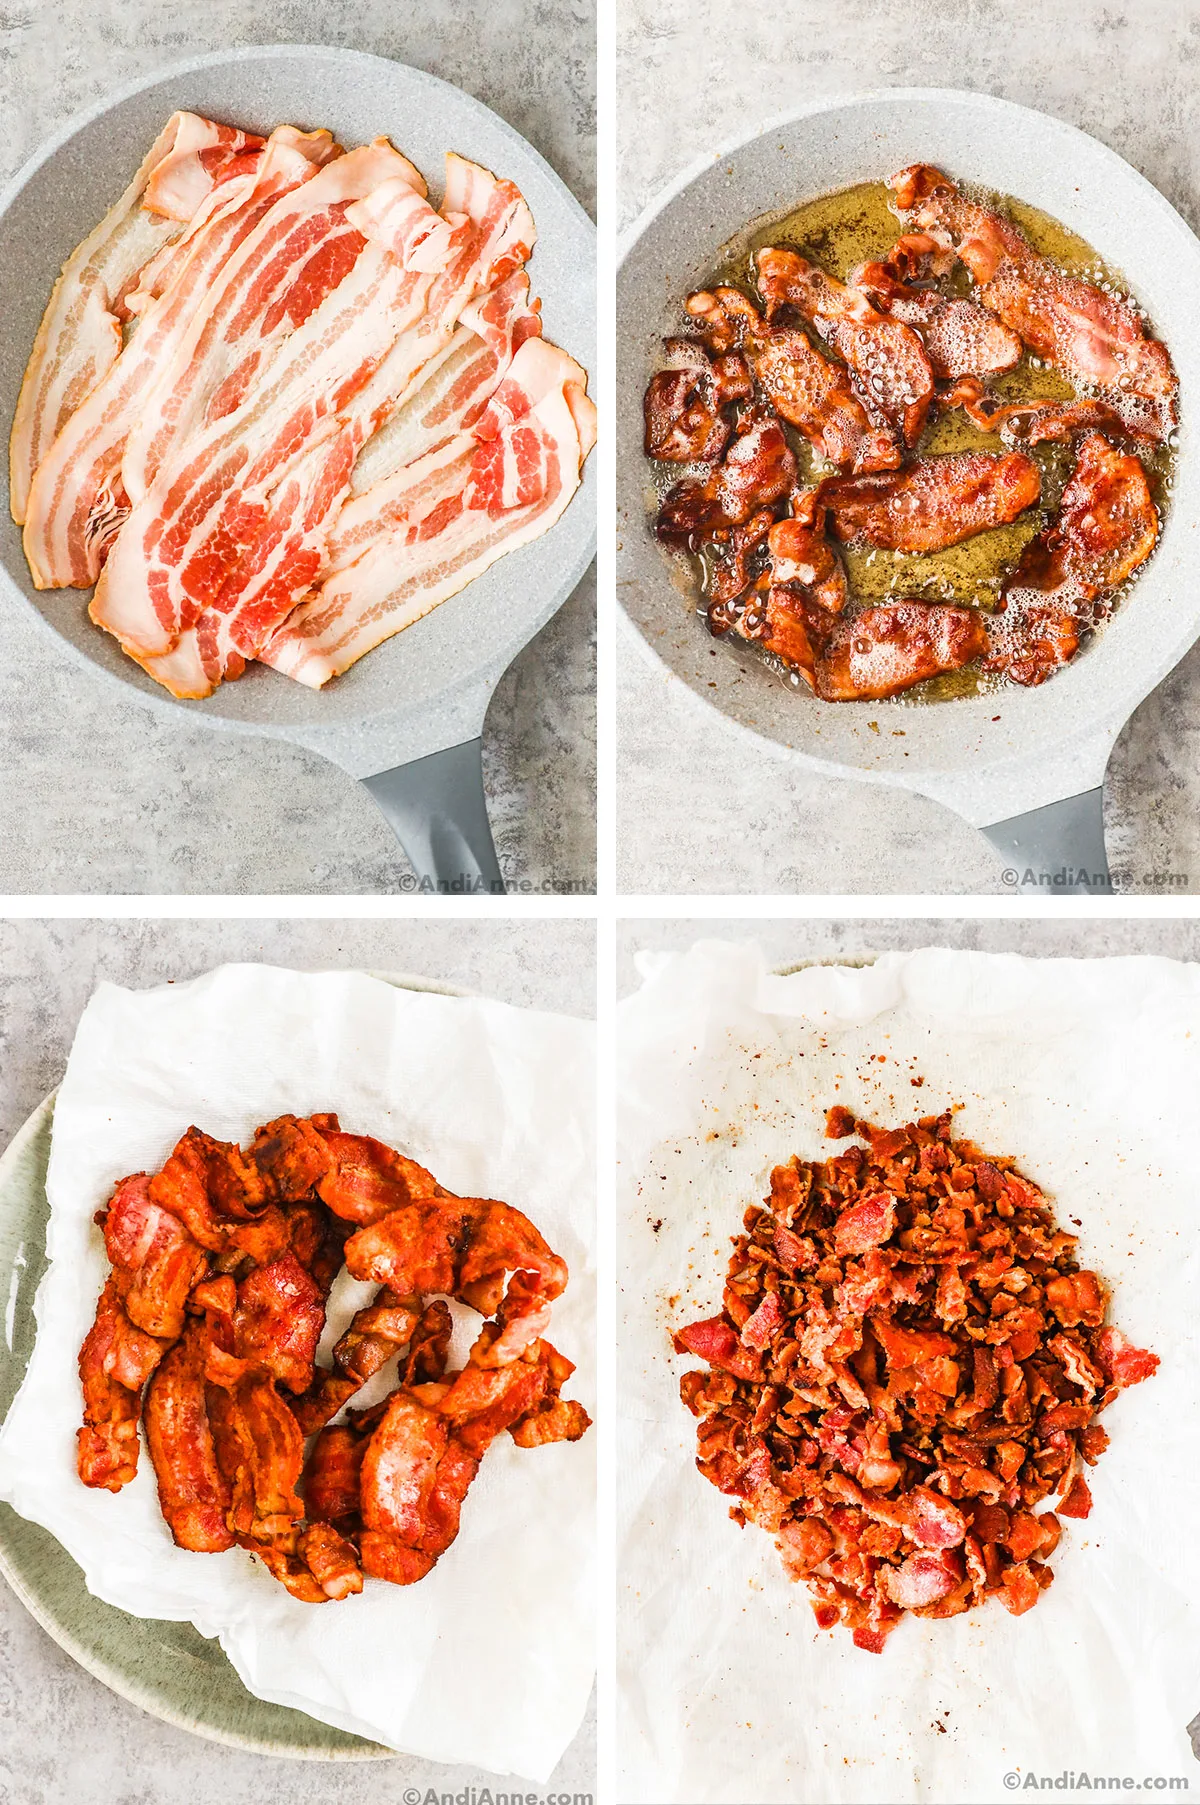 Four images of bacon in various cooking stages. First is raw bacon strips in a frying pan. Second is cooked bacon strips. Third is cooked bacon strips on paper twoel. Fourth is crumbled bacon strips.